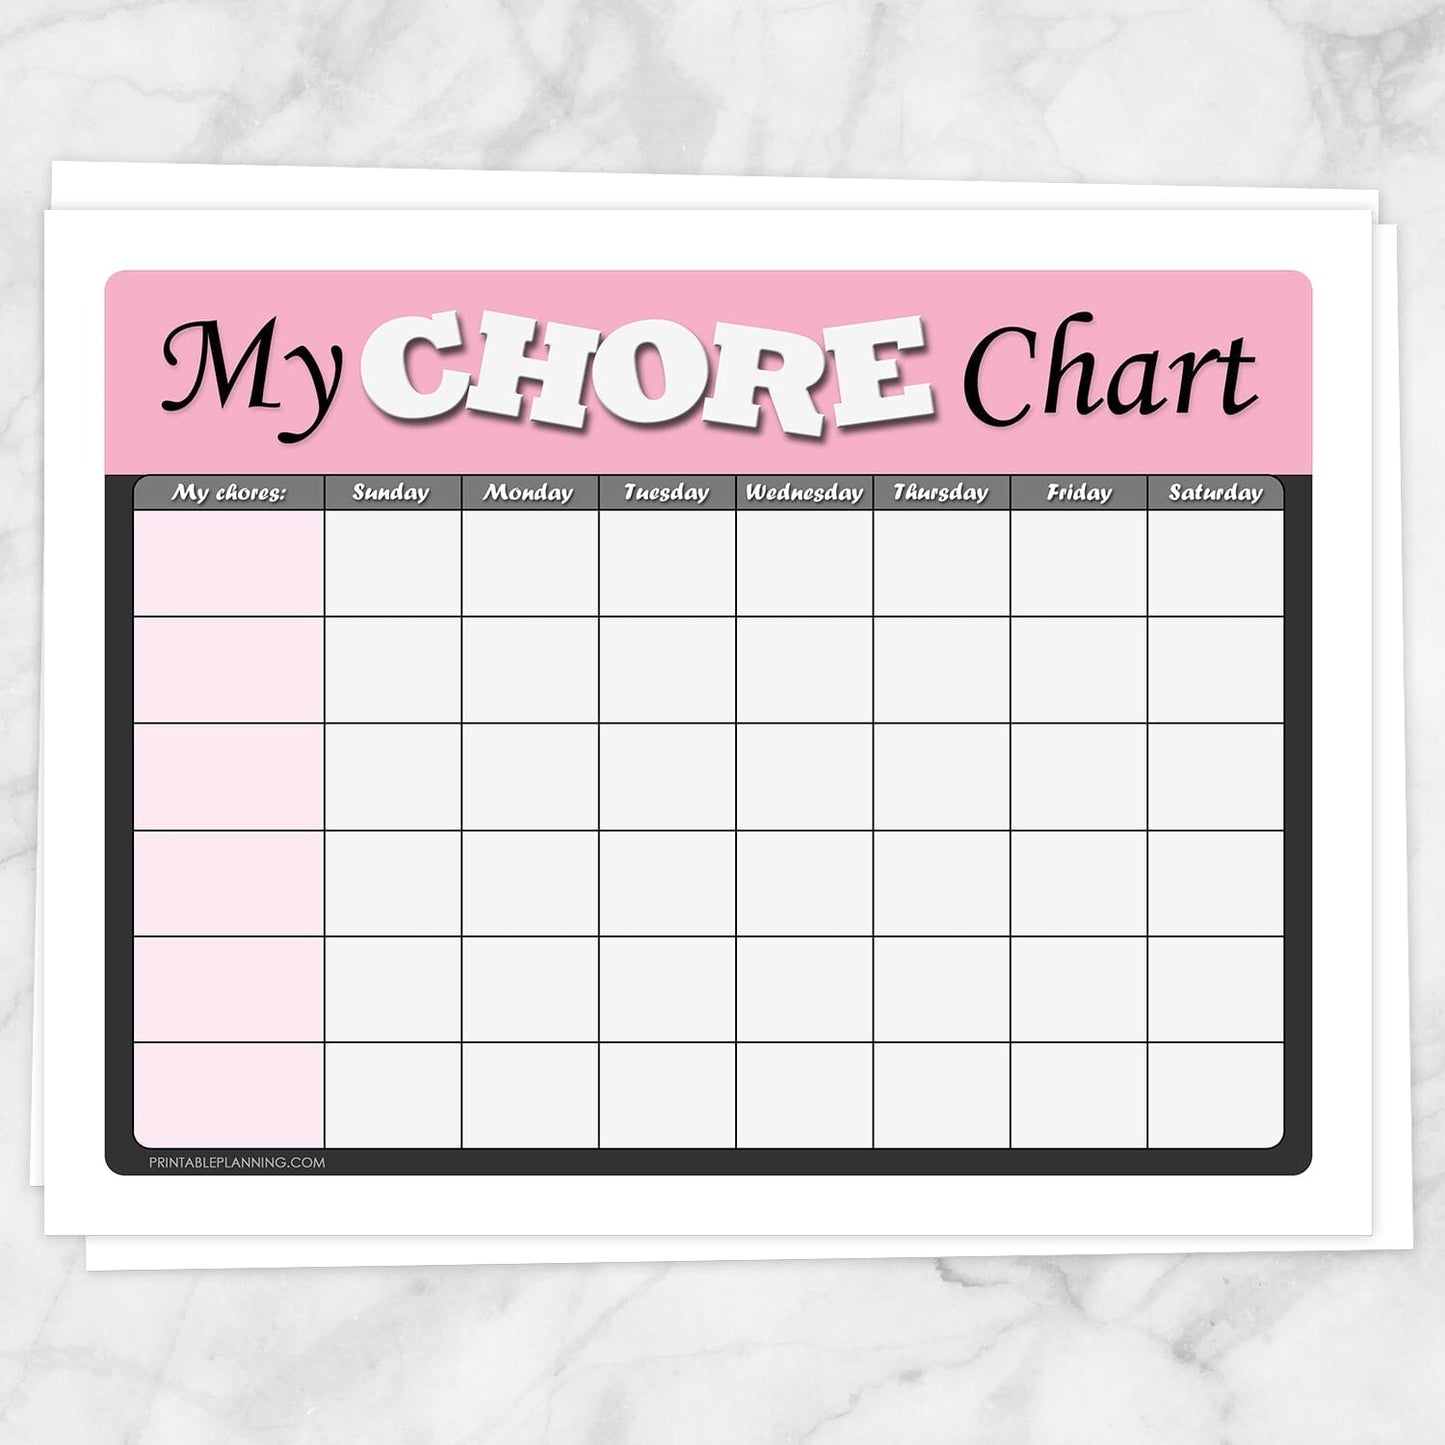 Printable Kids Chore Chart - 'My Chore Chart' Weekly Page in pink at Printable Planning.